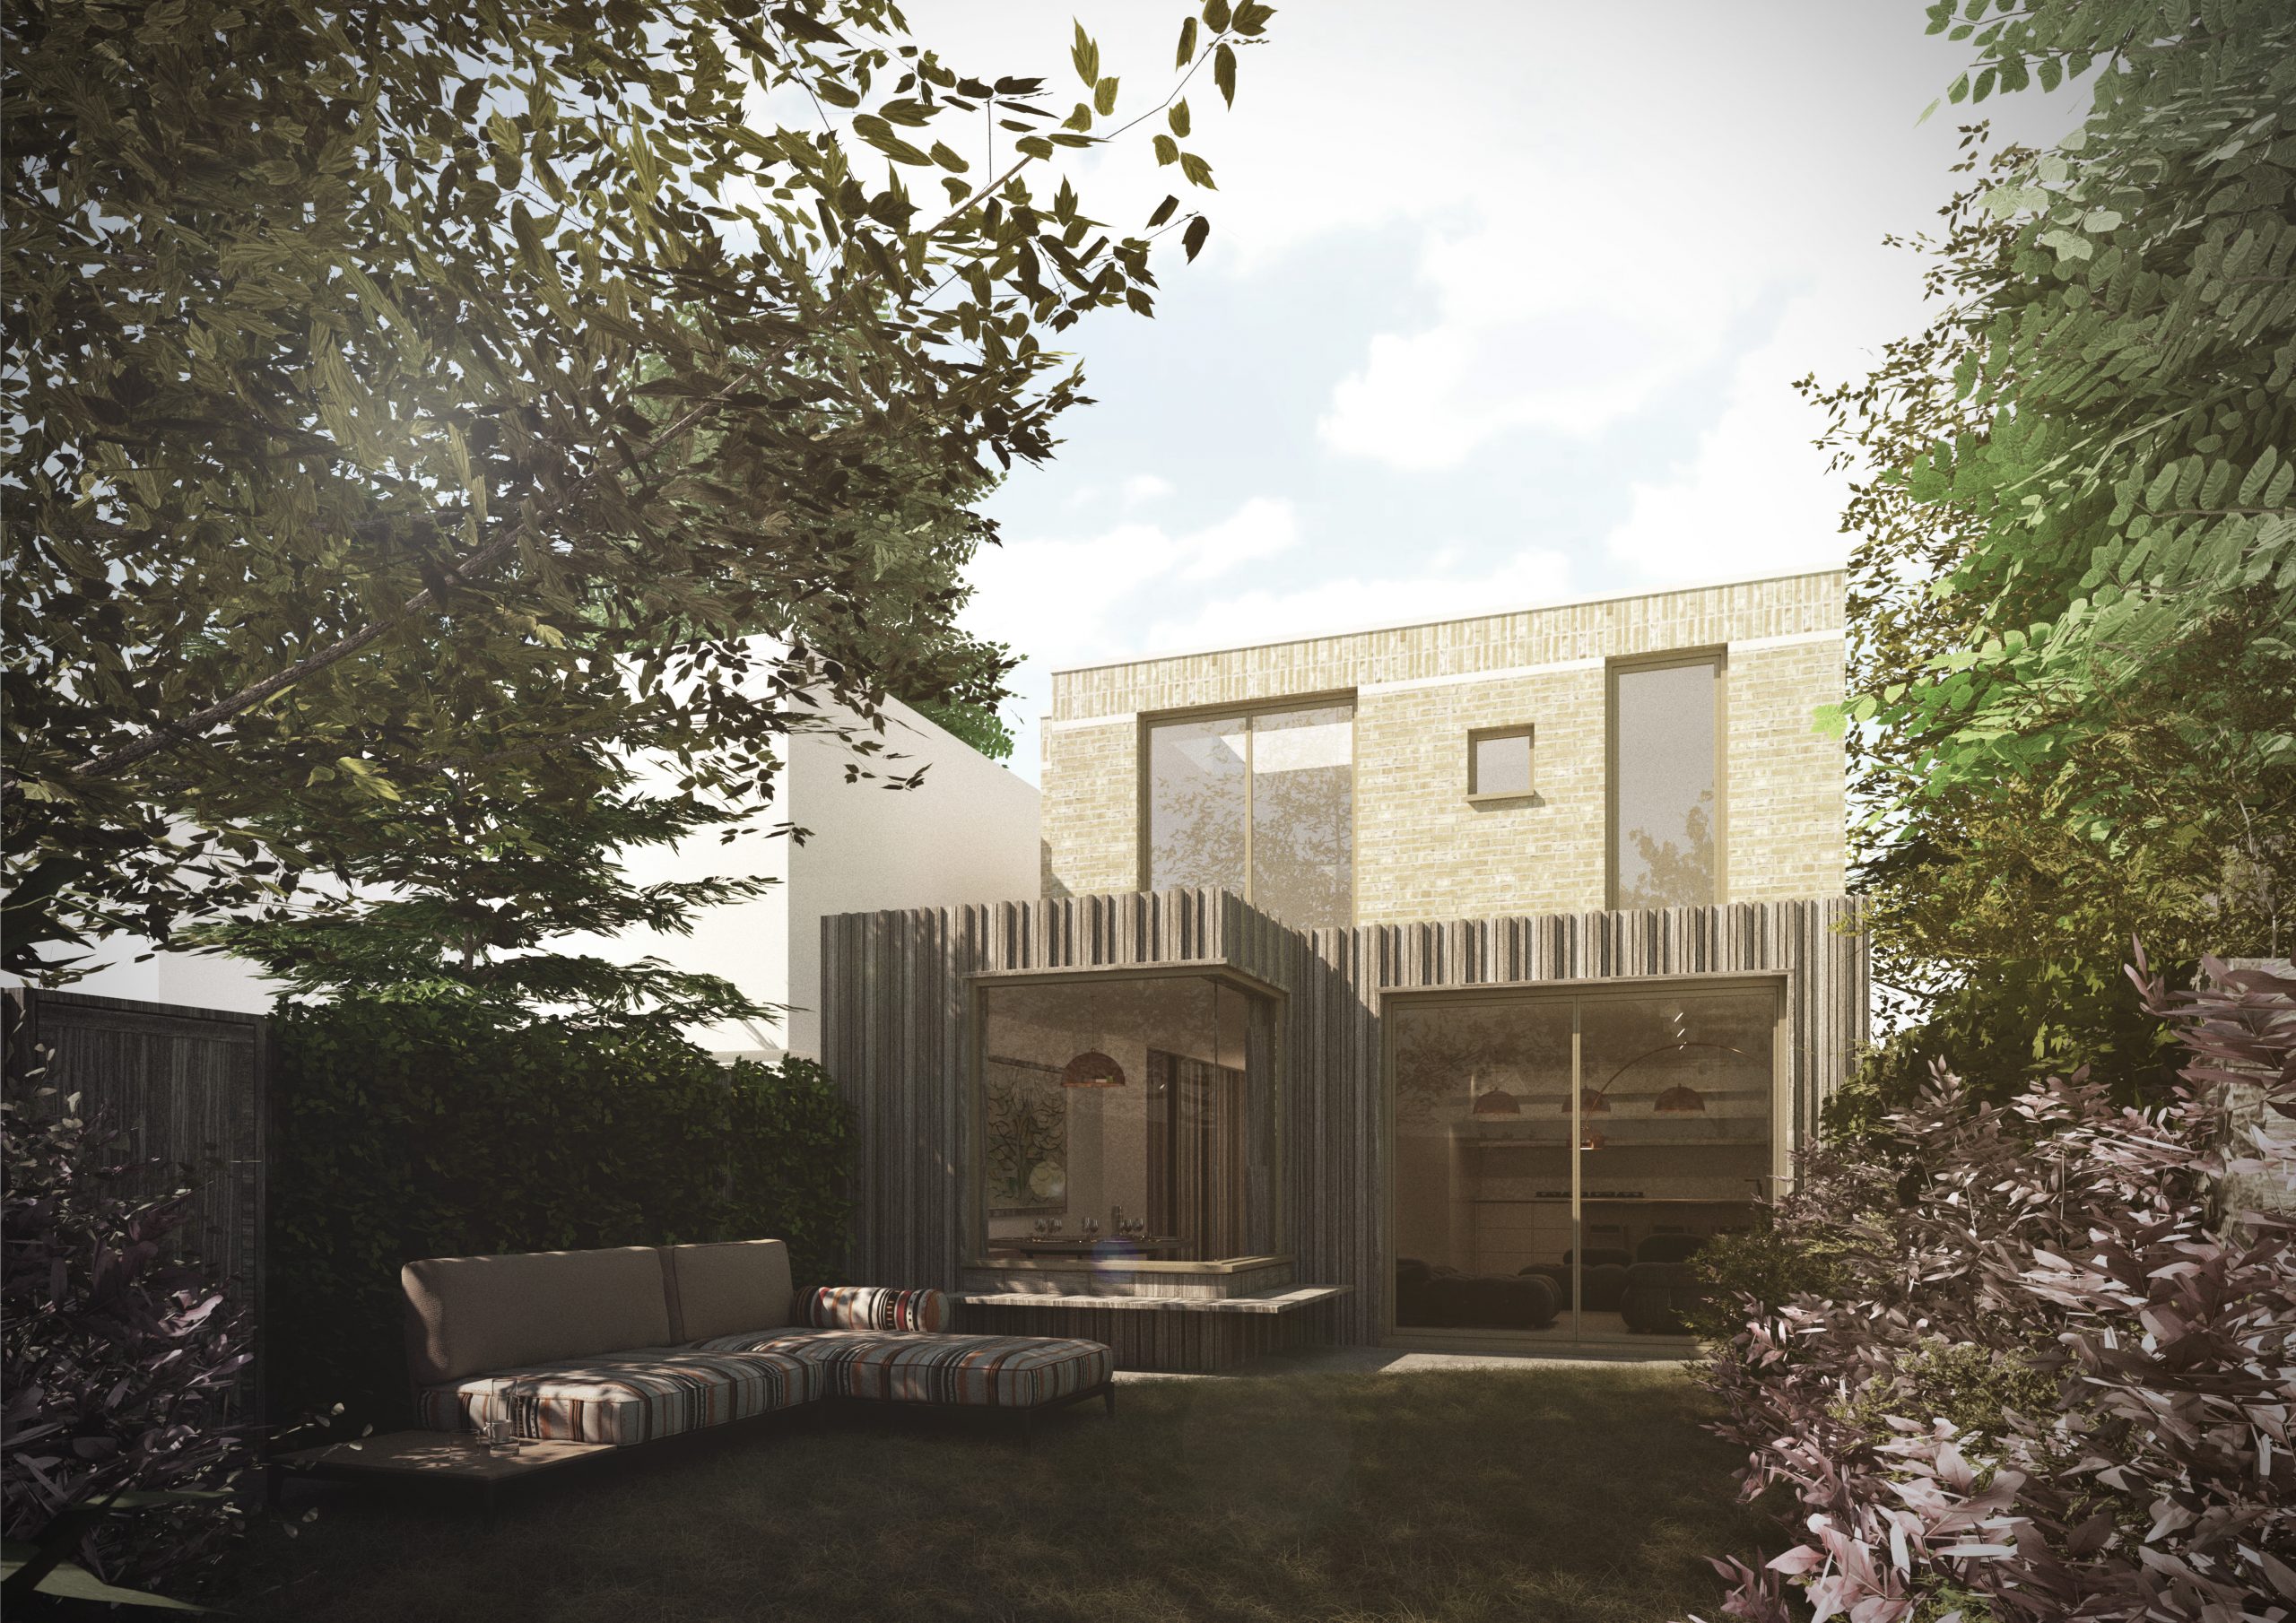 Visualisation of the proposed house at Boxall Road, Dulwich Village